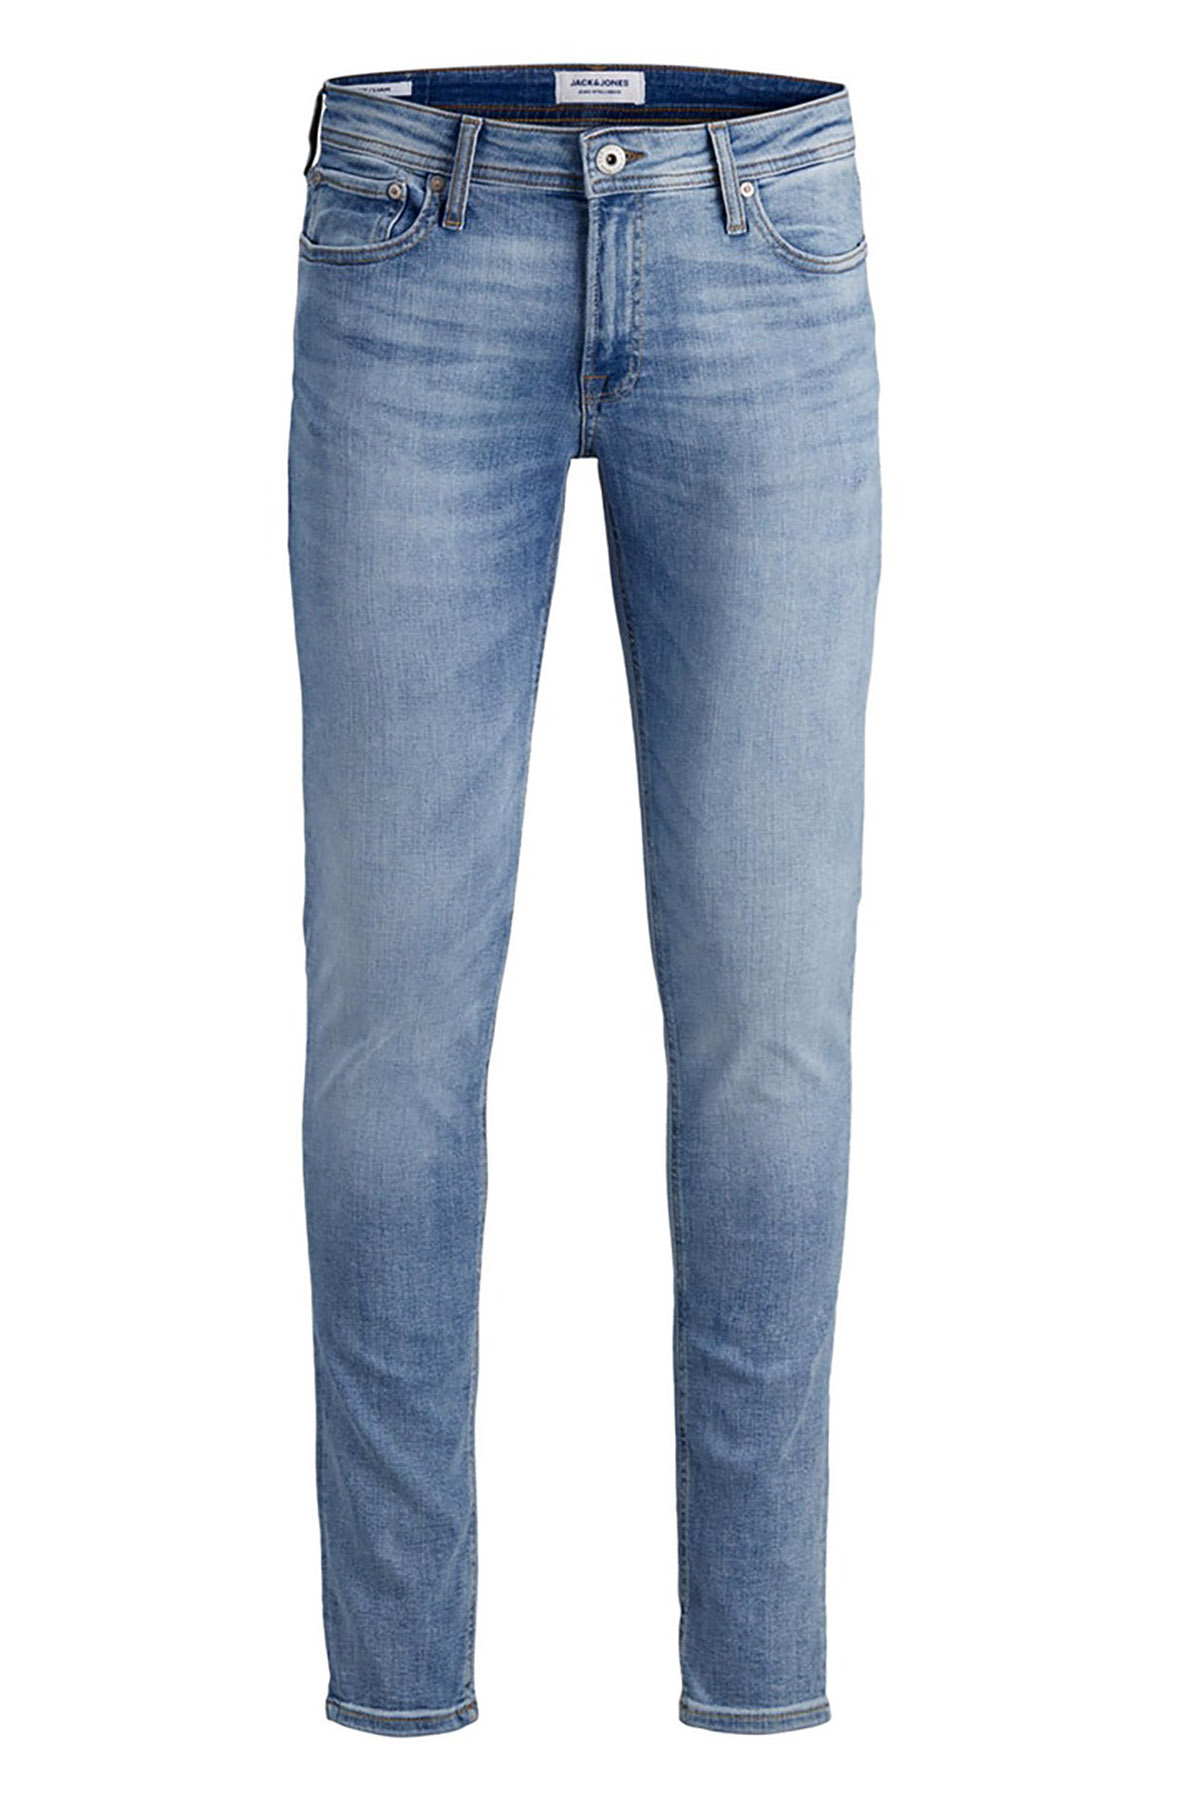 Skinny Fit Jeans "Liam"